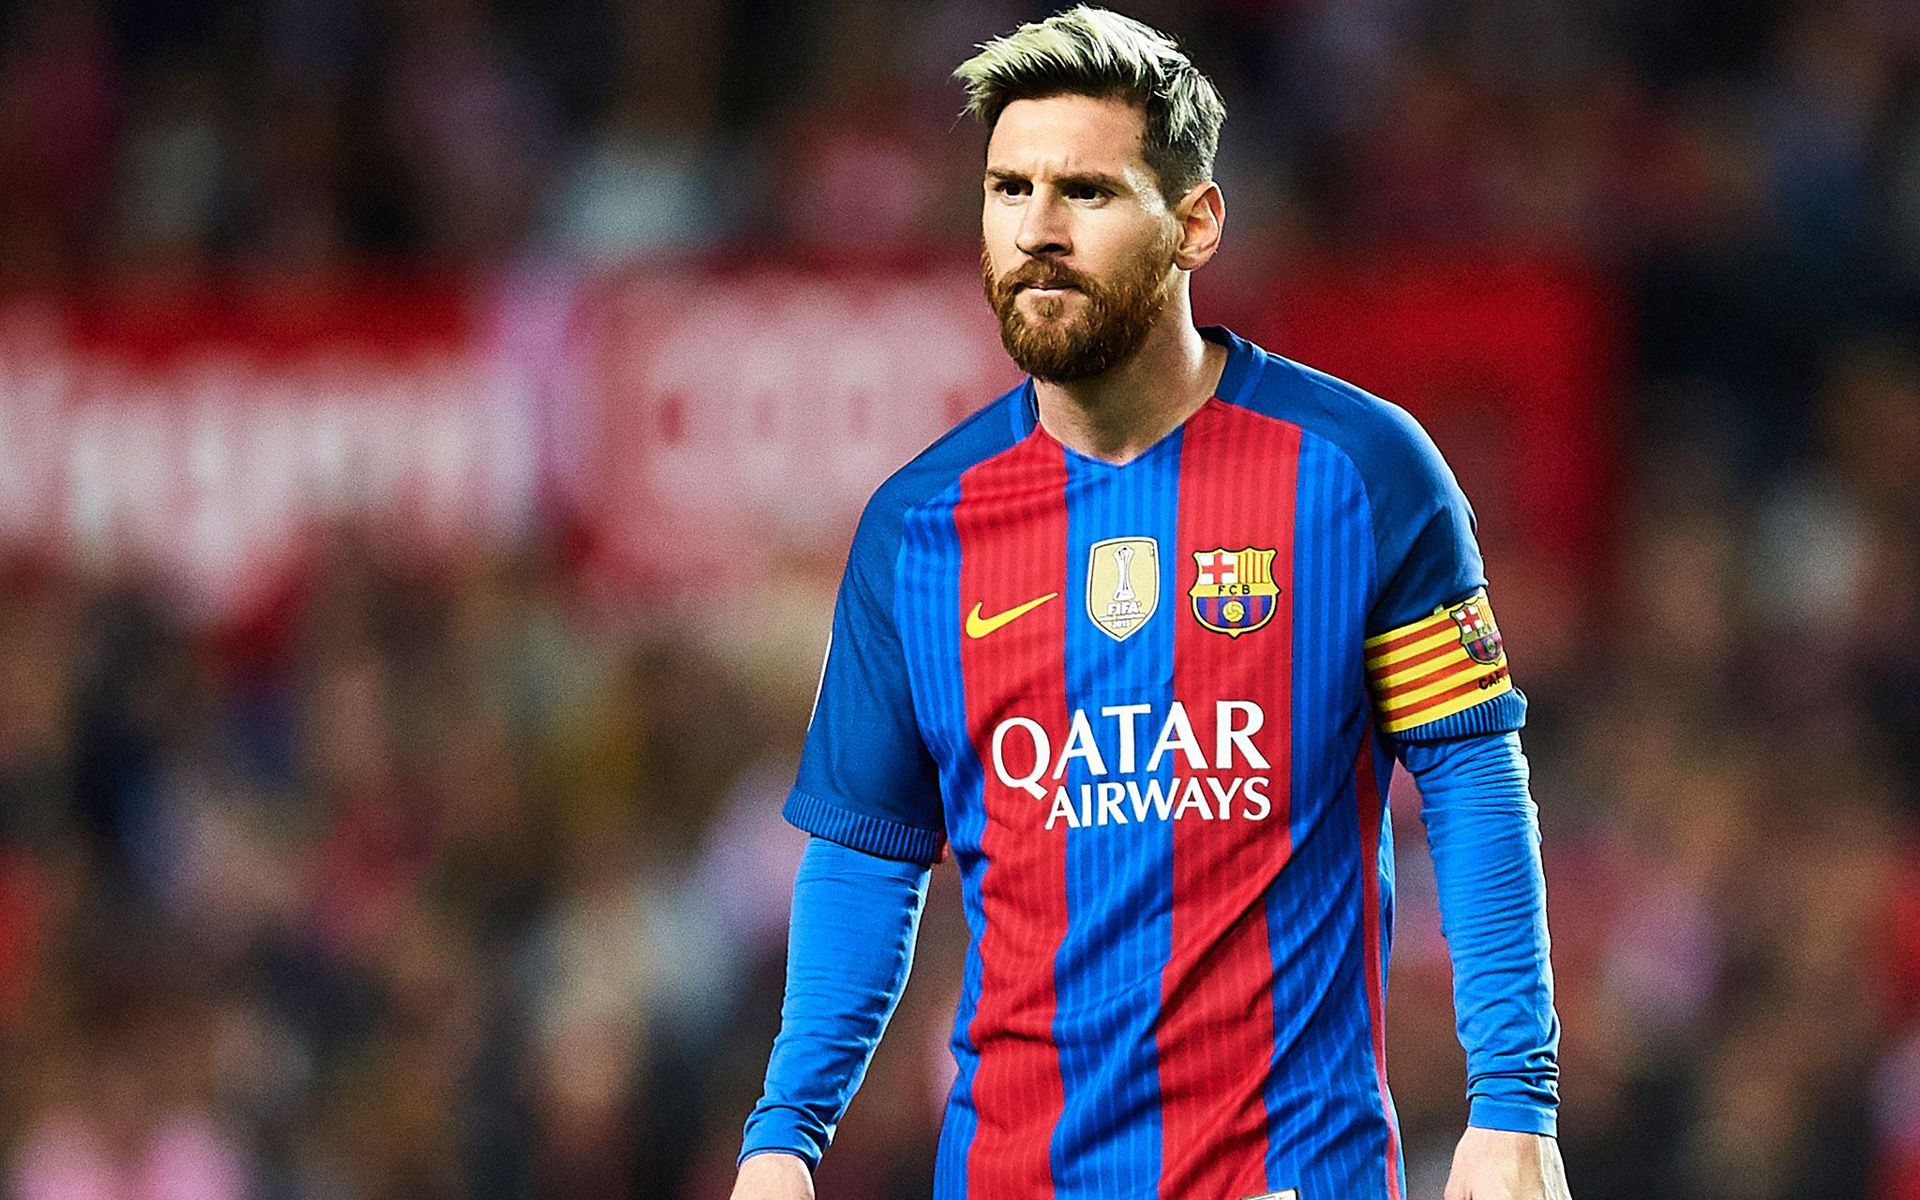 Lionel Messi's Bleached Blonde Hair: Love it or Hate it? - wide 3